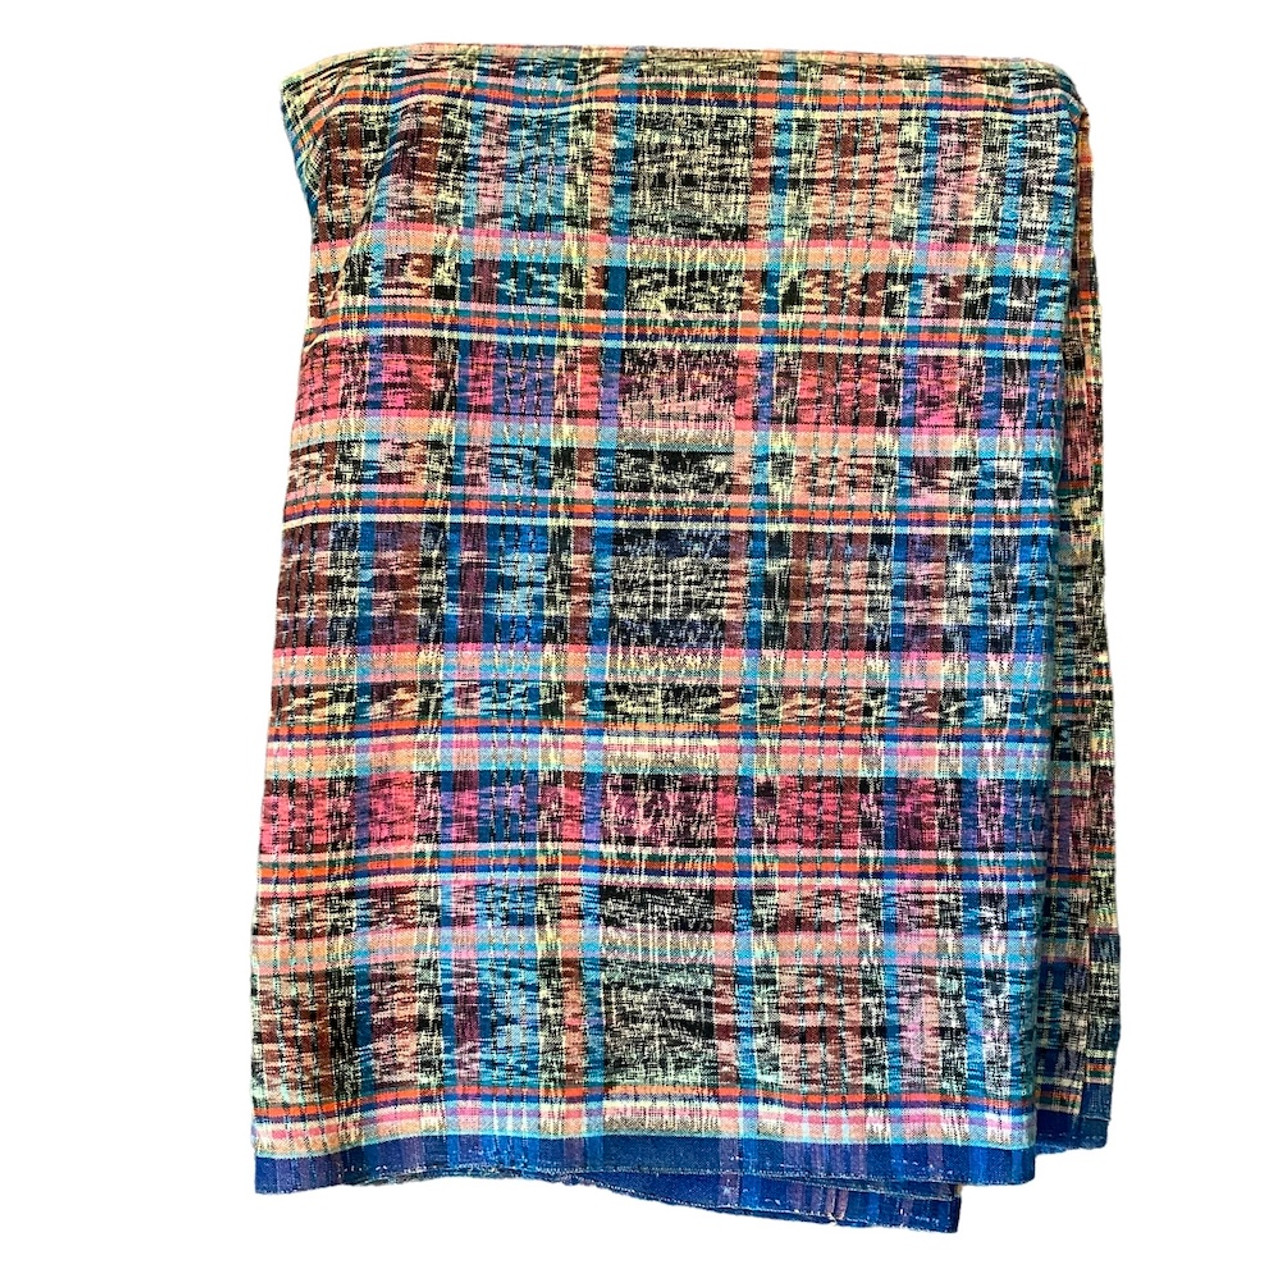 Mayan Ikat Handwoven Cotton Kitchen Towel, Black or Red - Education And More